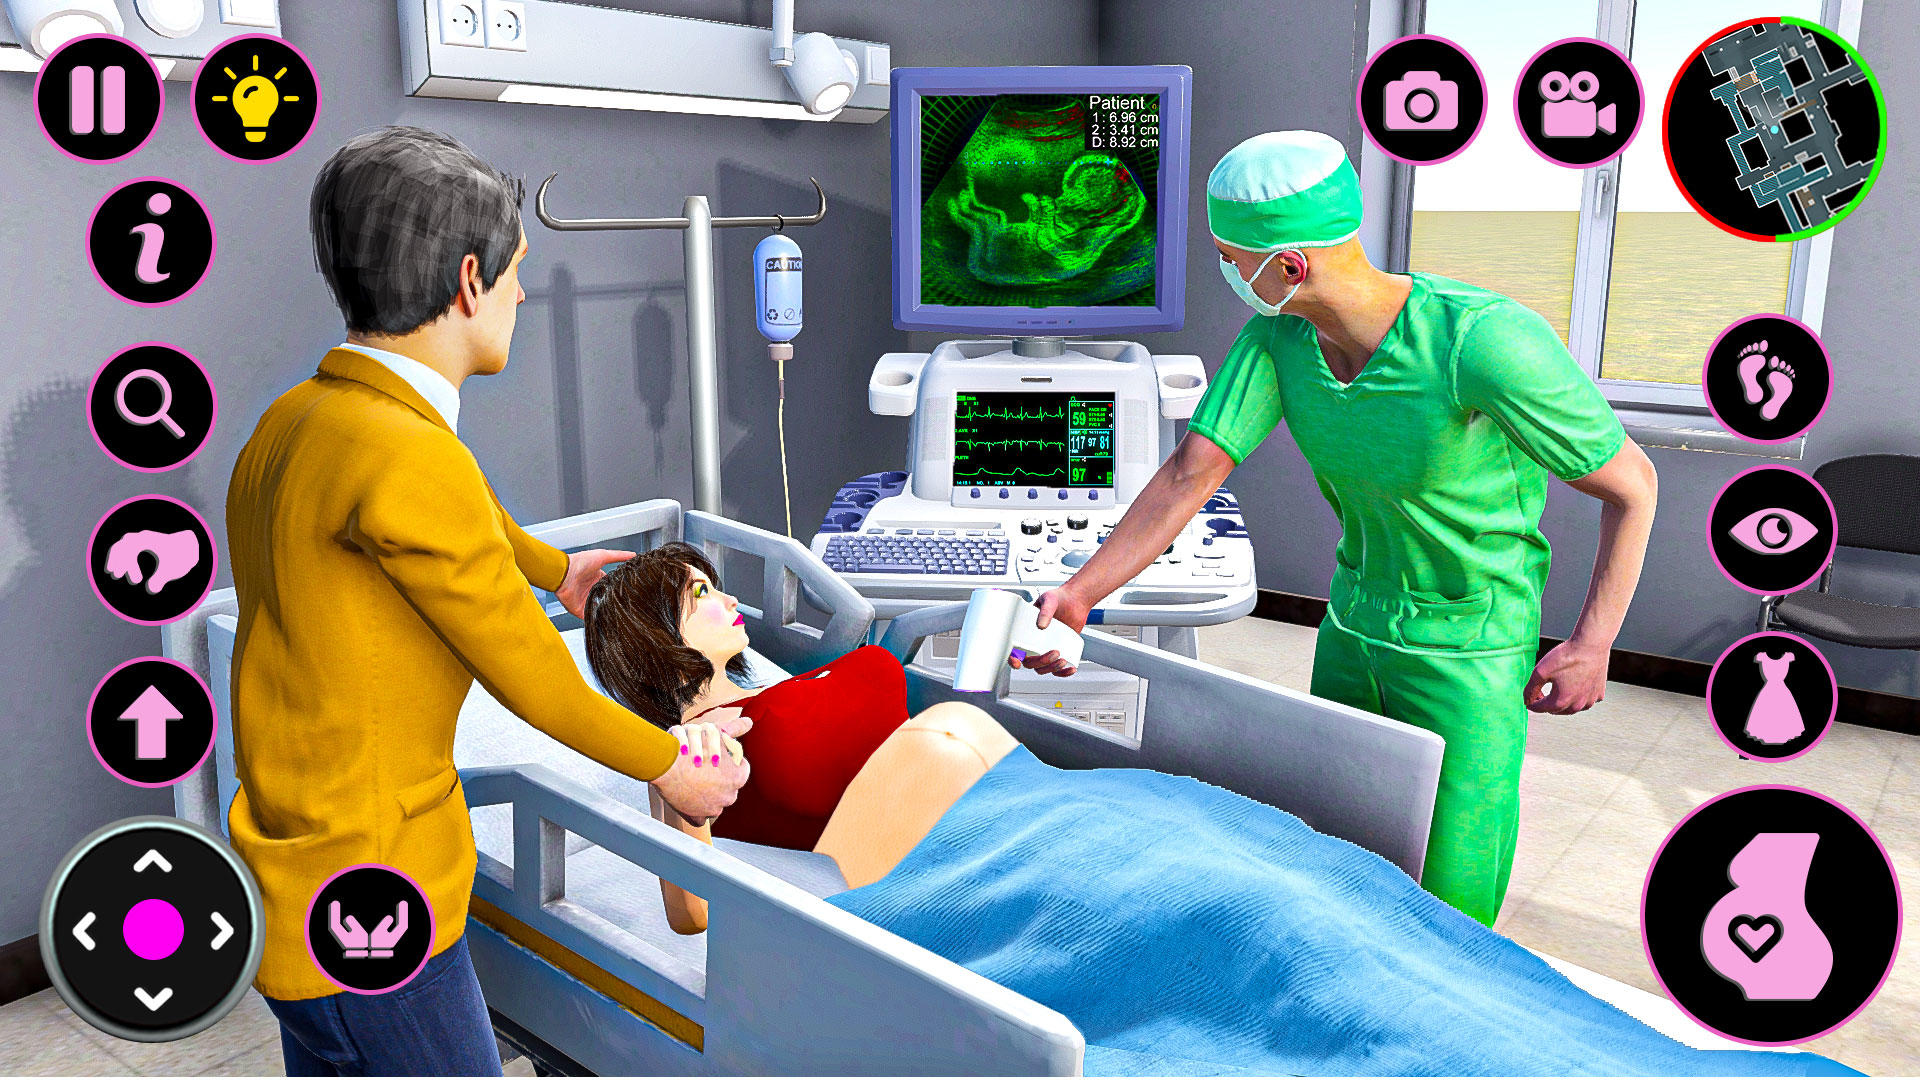 Pregnant Mom Simulator Games - Apps on Google Play